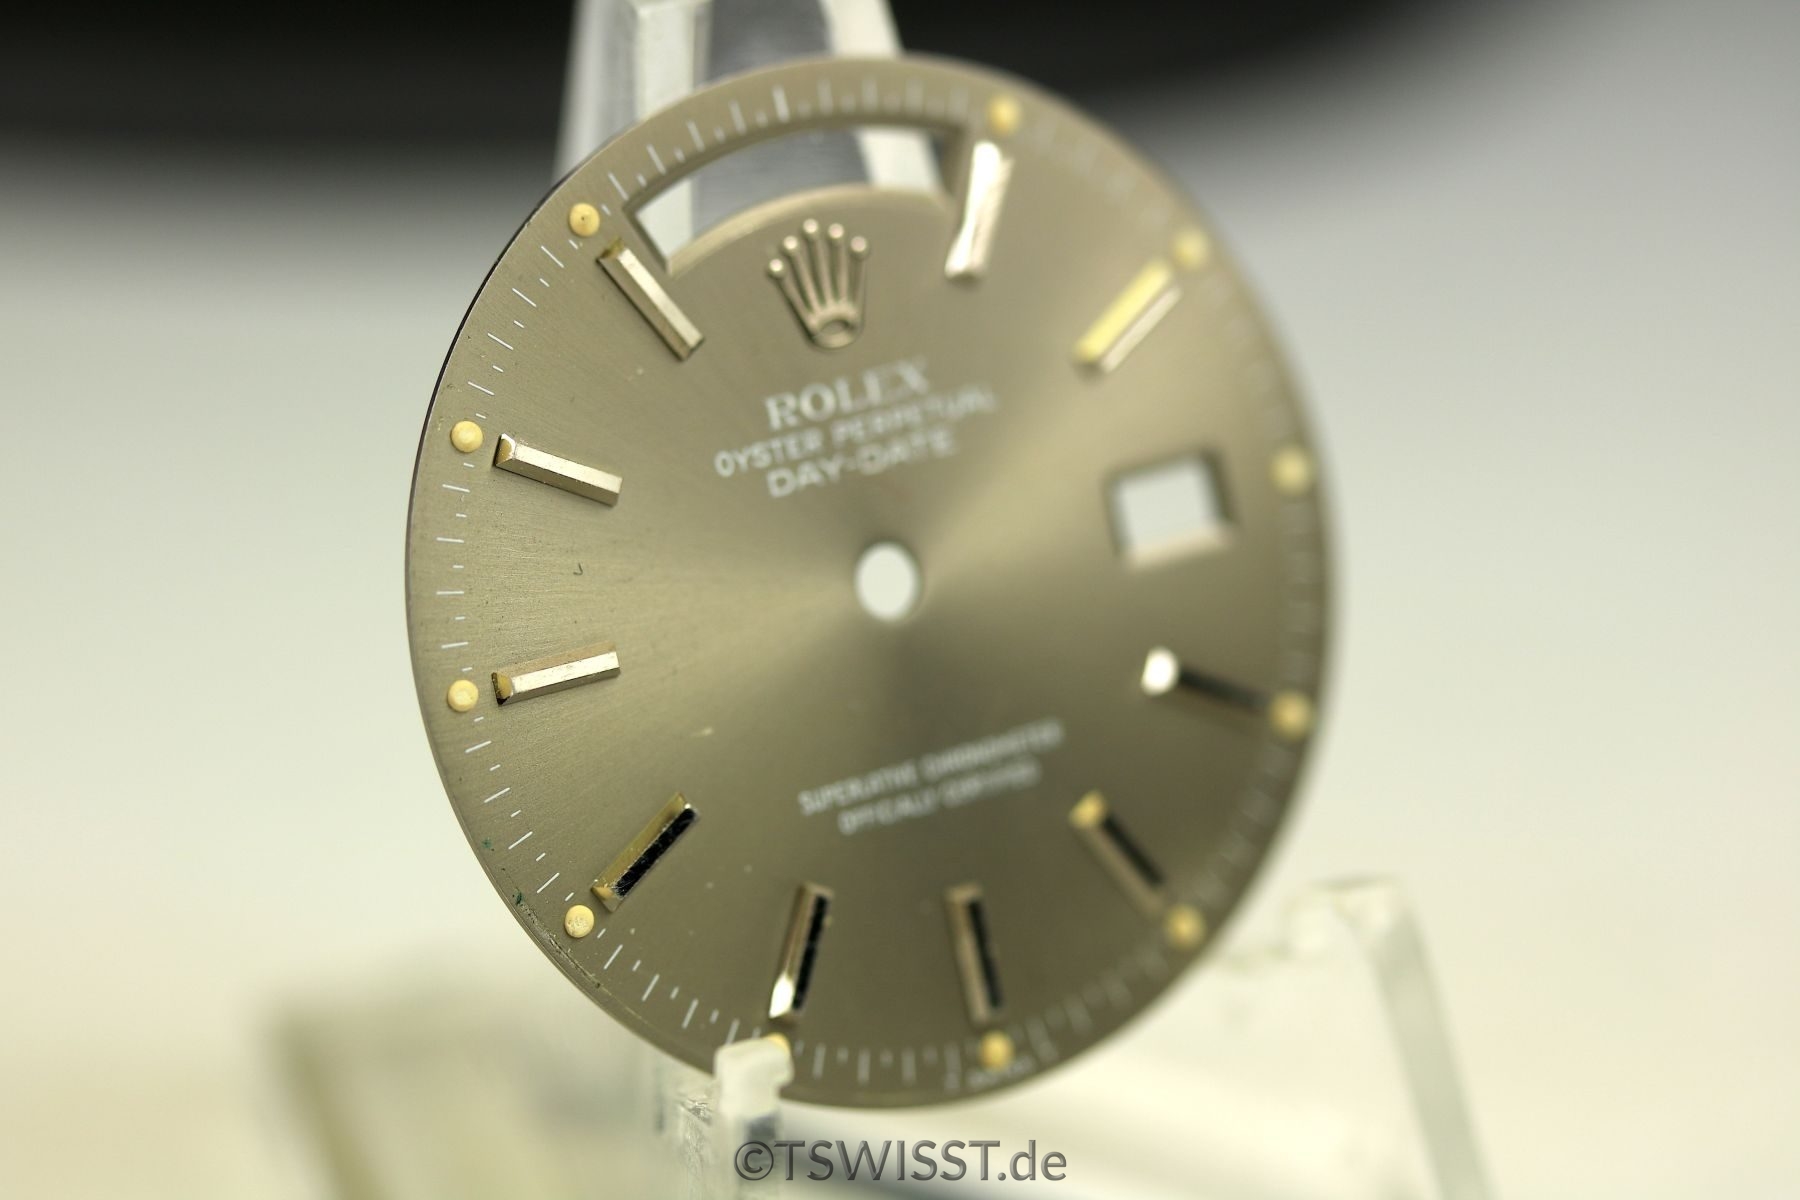 Rolex Day-Date dial